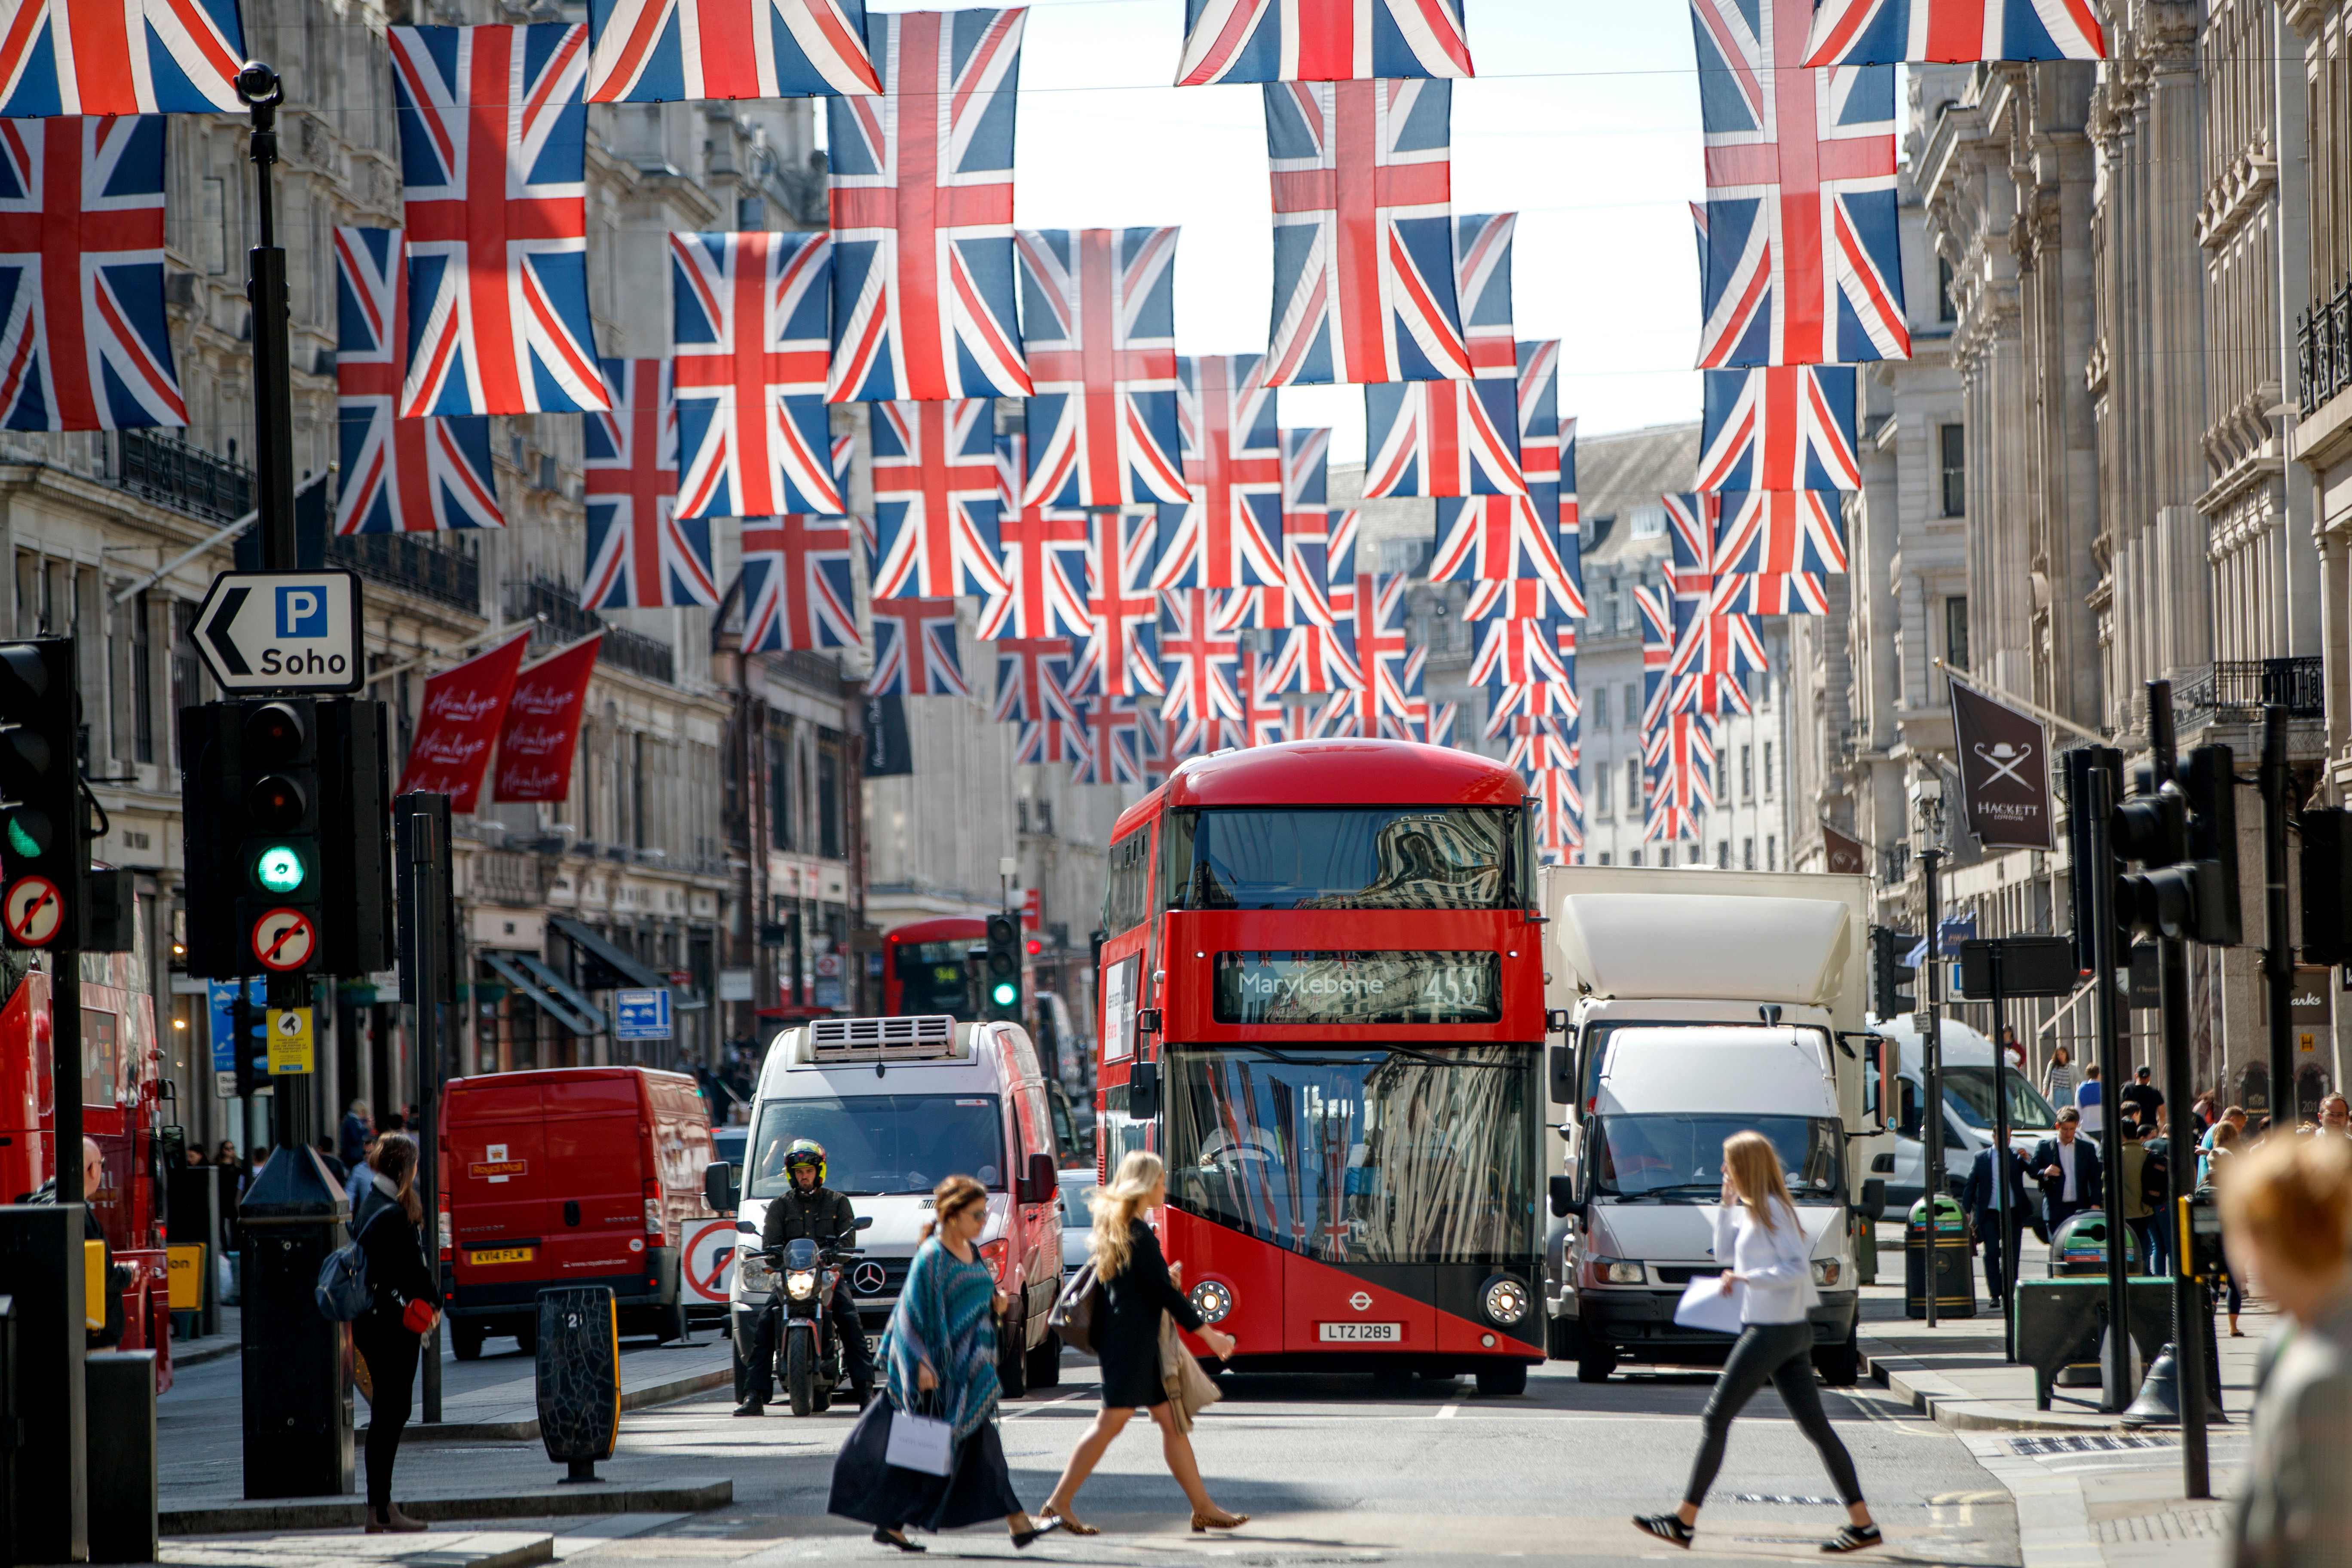 Union flag decorations are seen in Regent Street, London on May 11, 2018 ahead of the Royal Wedding of Prince Harry and US actress Meghan Markle. Britain's Prince Harry and US actress Meghan Markle will marry on May 19 at St George's Chapel in Windsor Castle. / AFP PHOTO / Tolga AKMEN